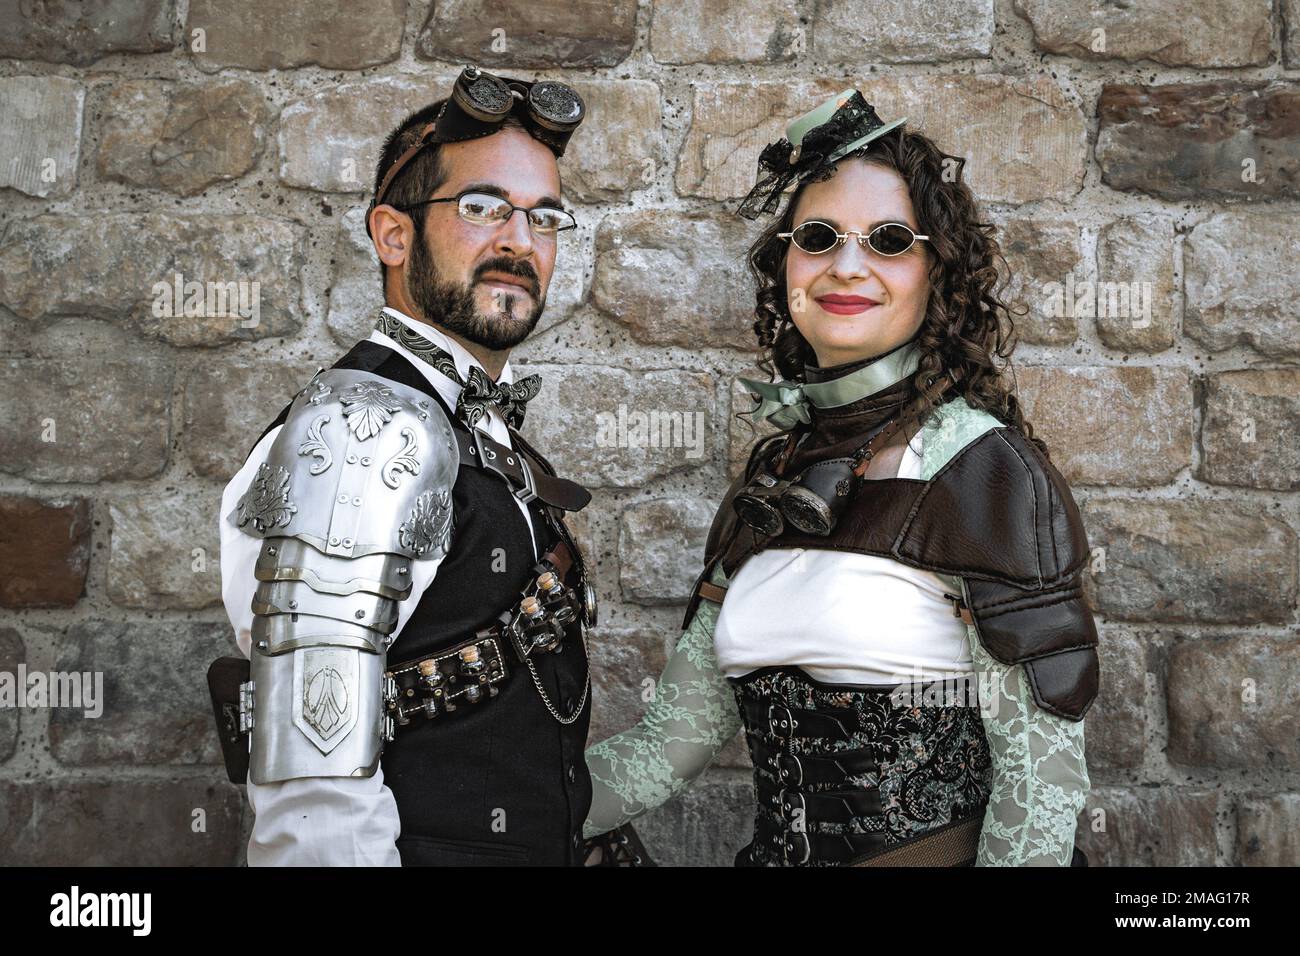 Portrait of an attractive steampunk couple wearing retro futuristic clothing. Stock Photo